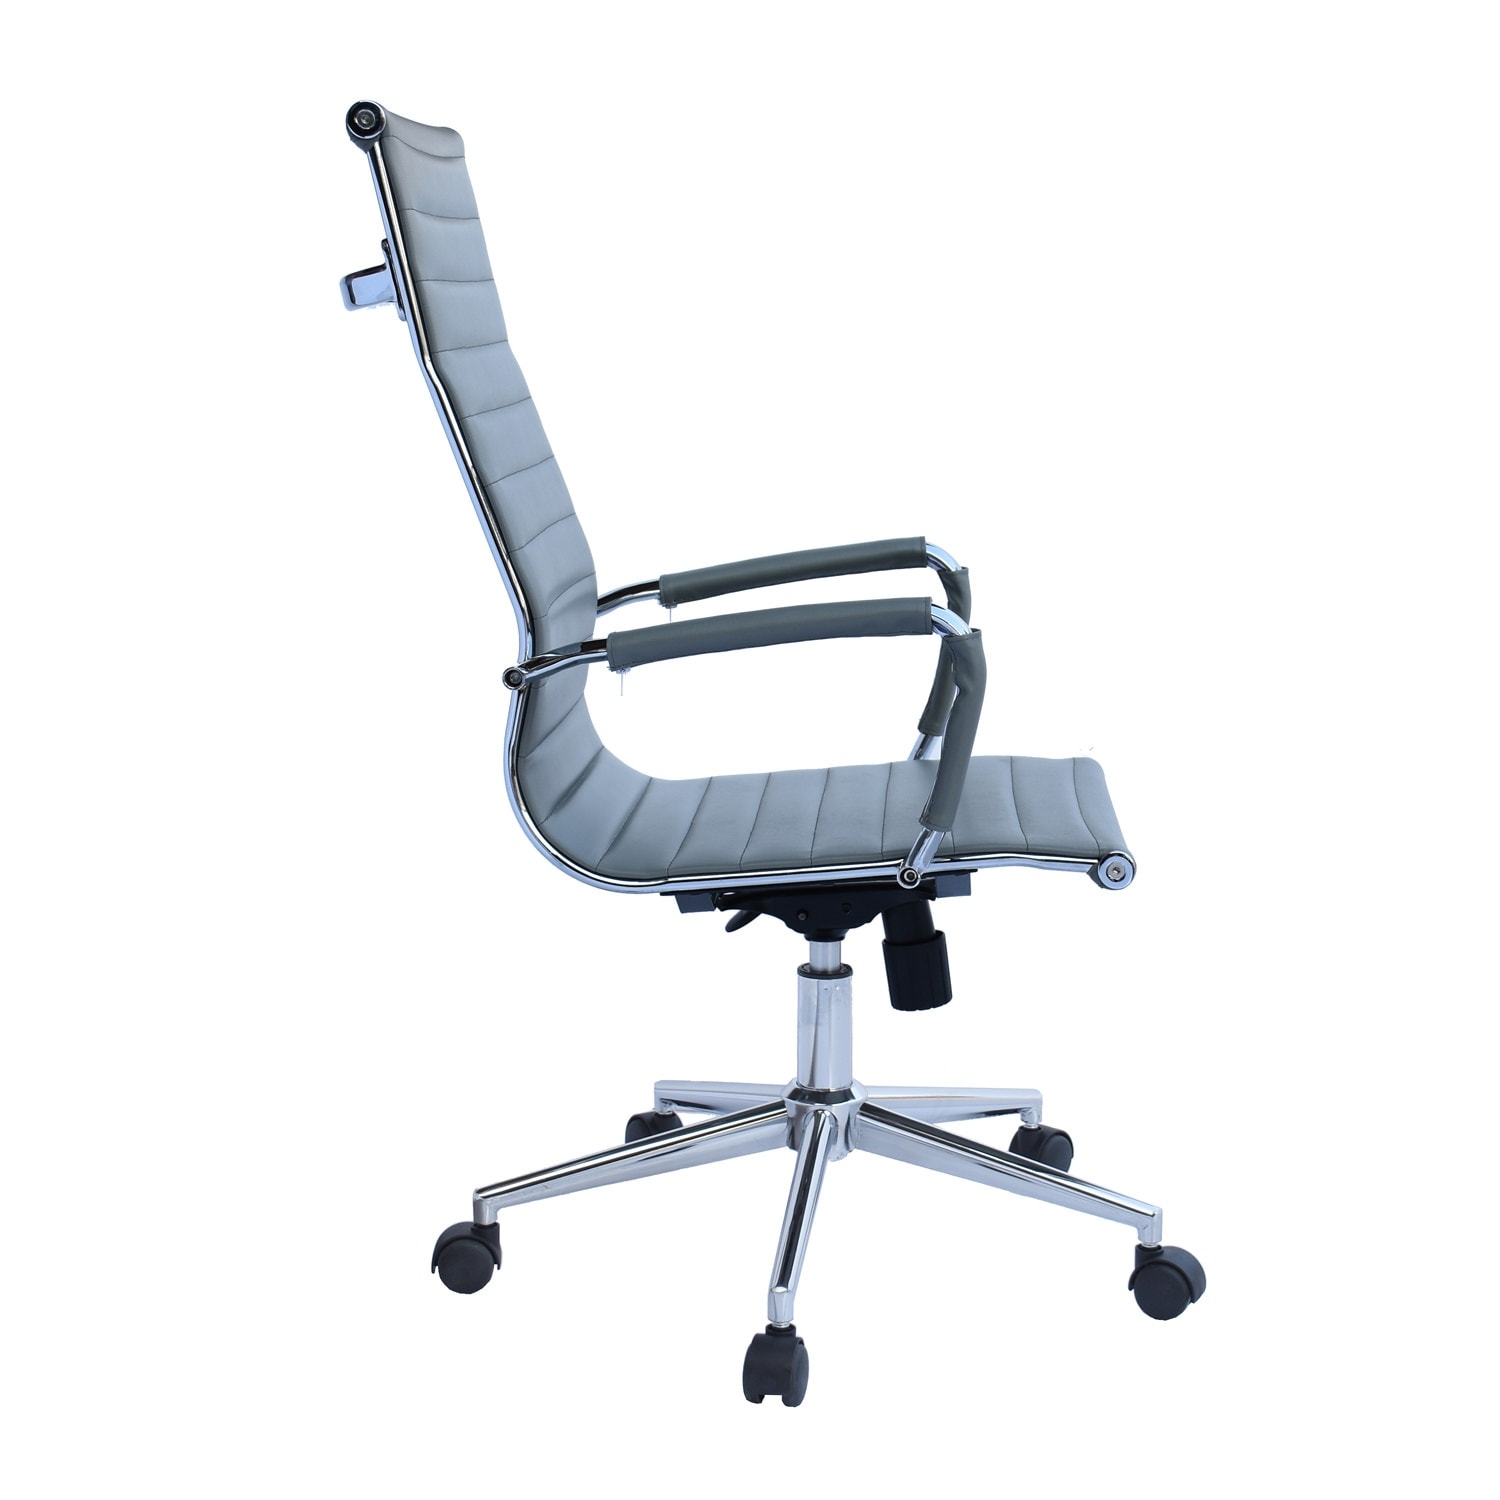 https://ak1.ostkcdn.com/images/products/is/images/direct/14e6b023ecffd5367f9da17b13f556f4597eeebb/2xhome-Executive-Ergonomic-High-Back-Modern-Office-Chair-Ribbed-PU-Leather-Swivel-for-Manager-Conference-Computer-Room.jpg